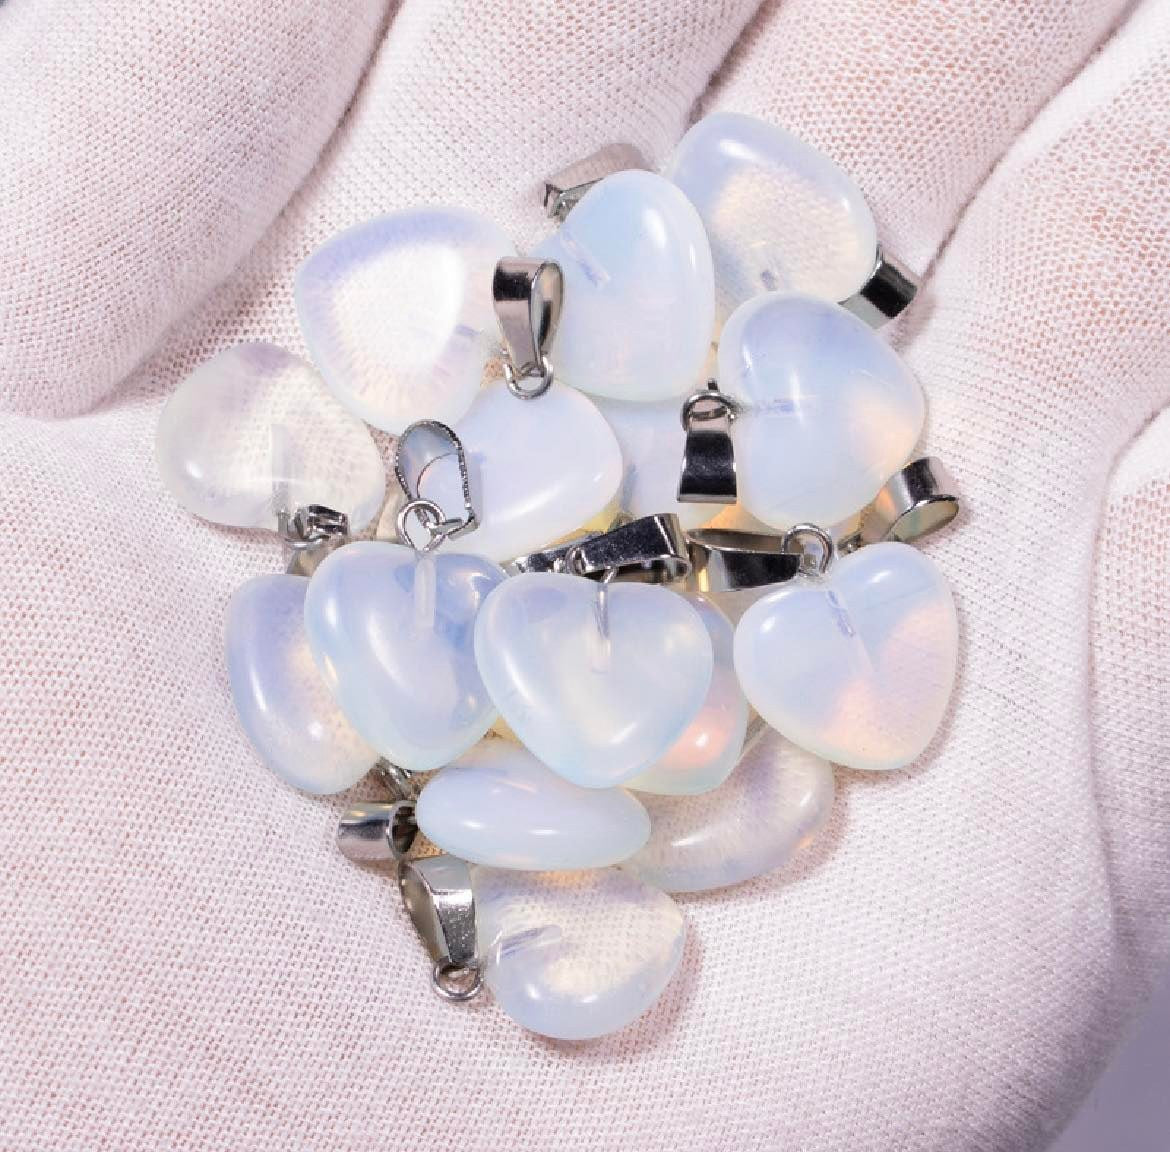 Opalite Heart Pendant - 15mm - 2g - China - NEW123 - Synthetic